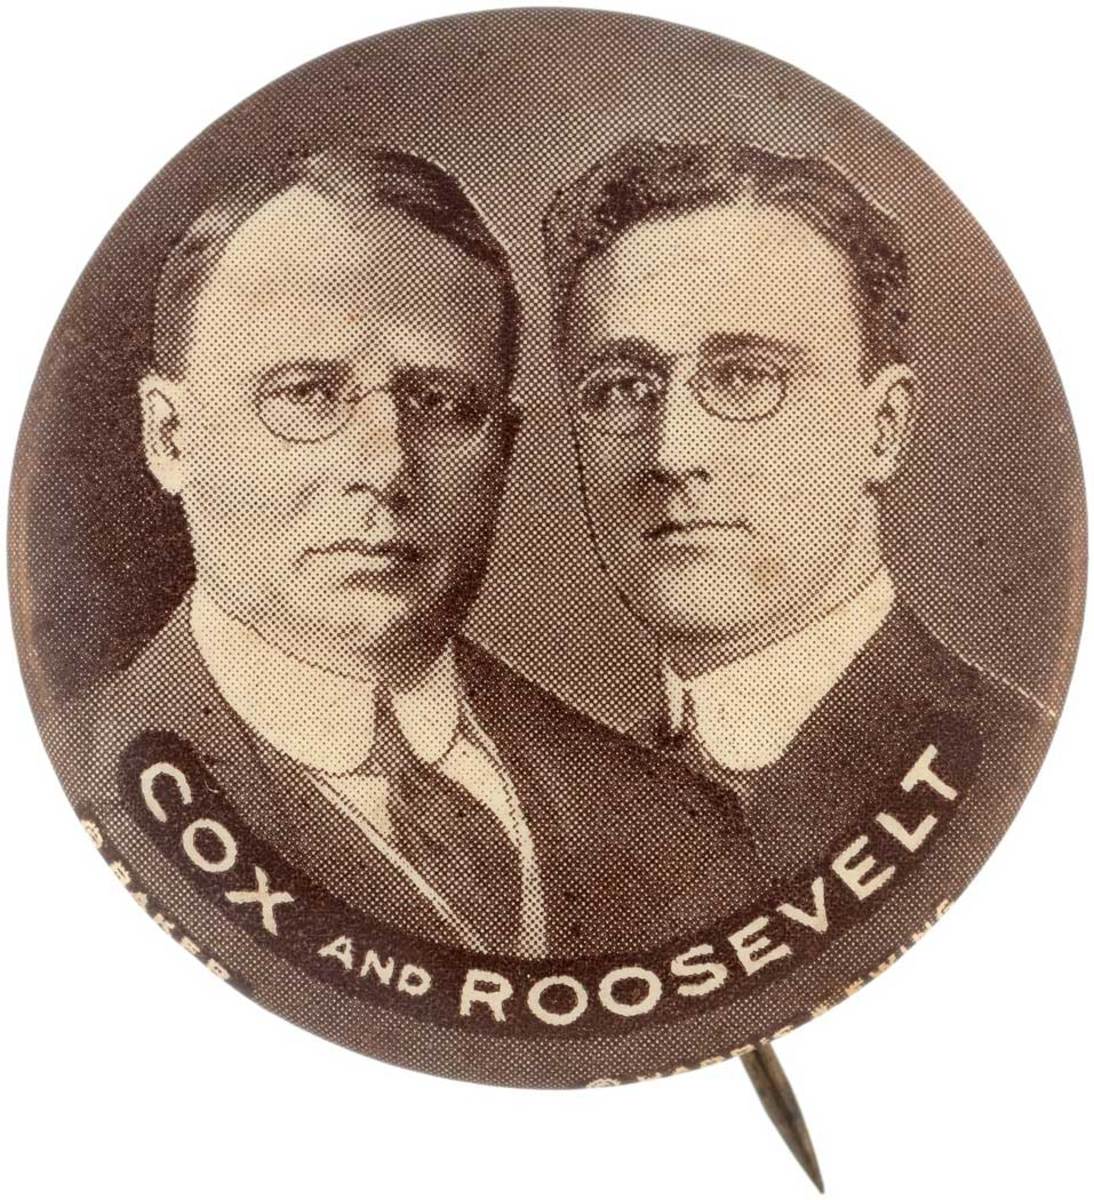 Cox and Roosevelt button